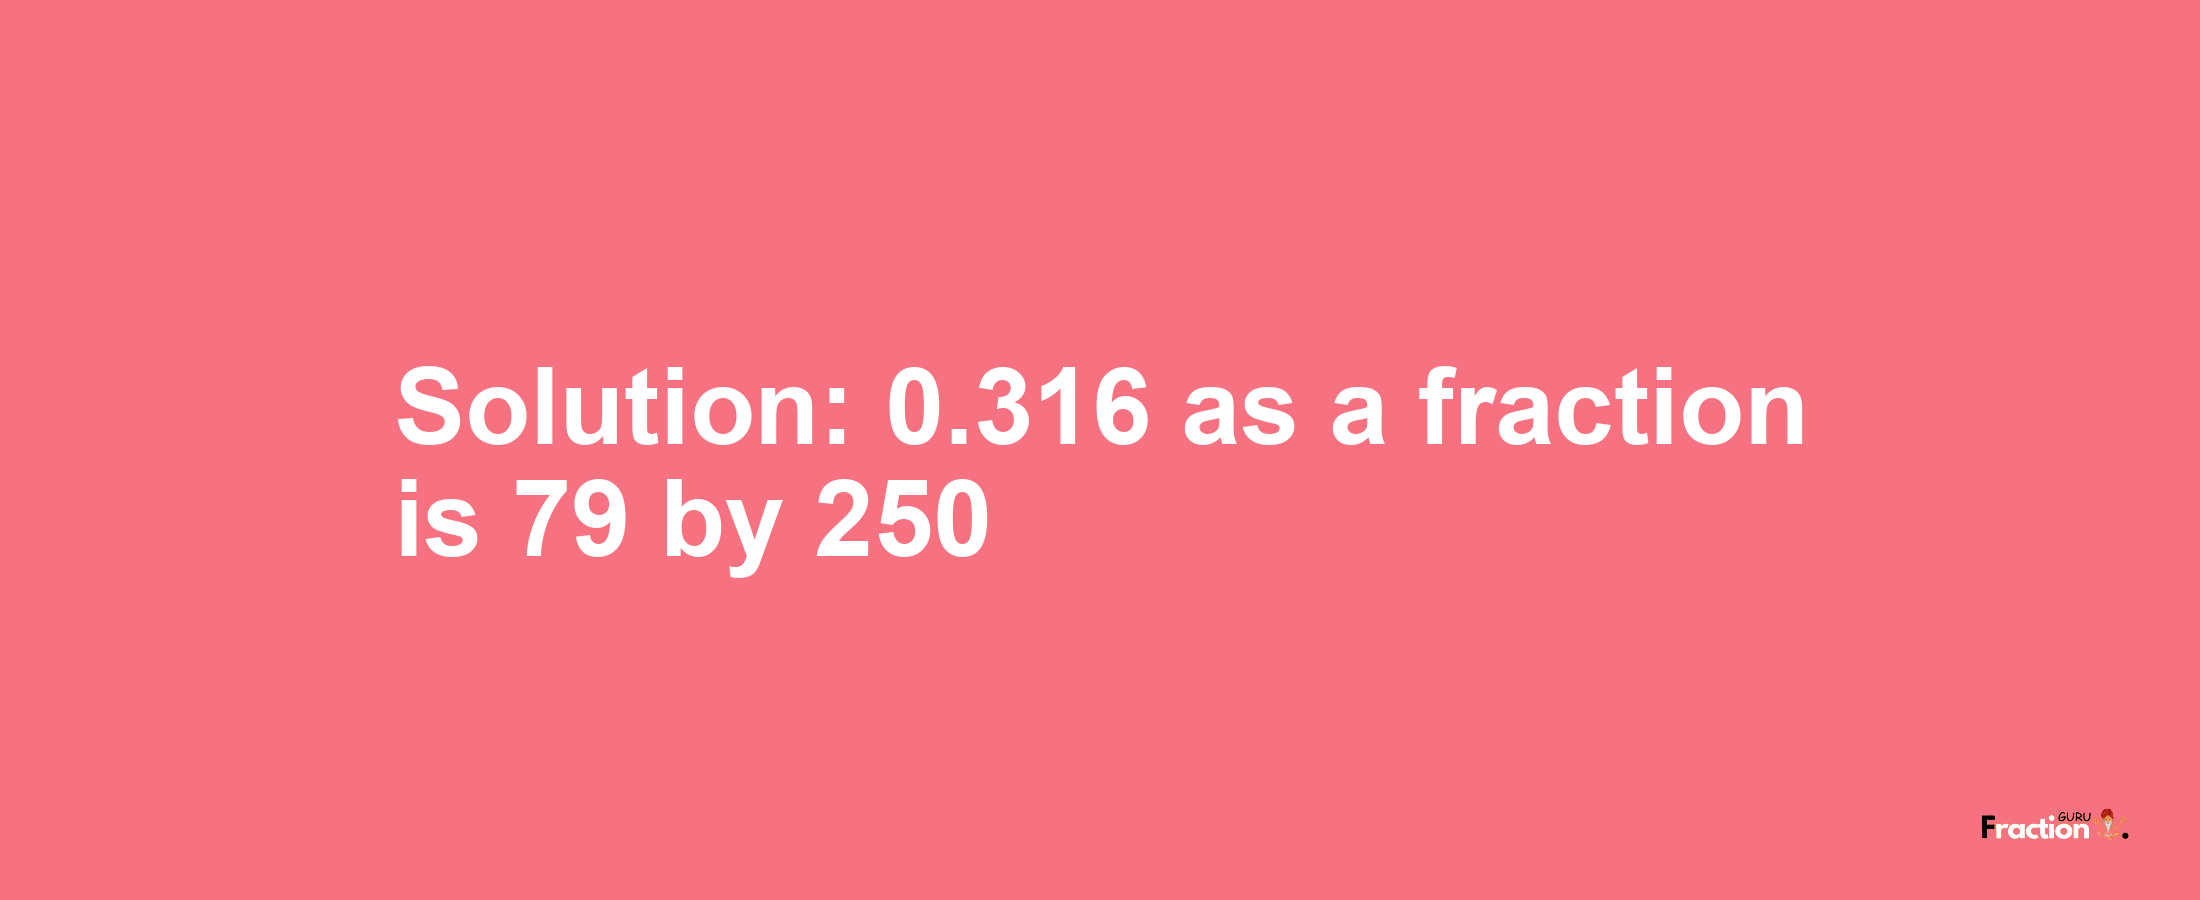 Solution:0.316 as a fraction is 79/250